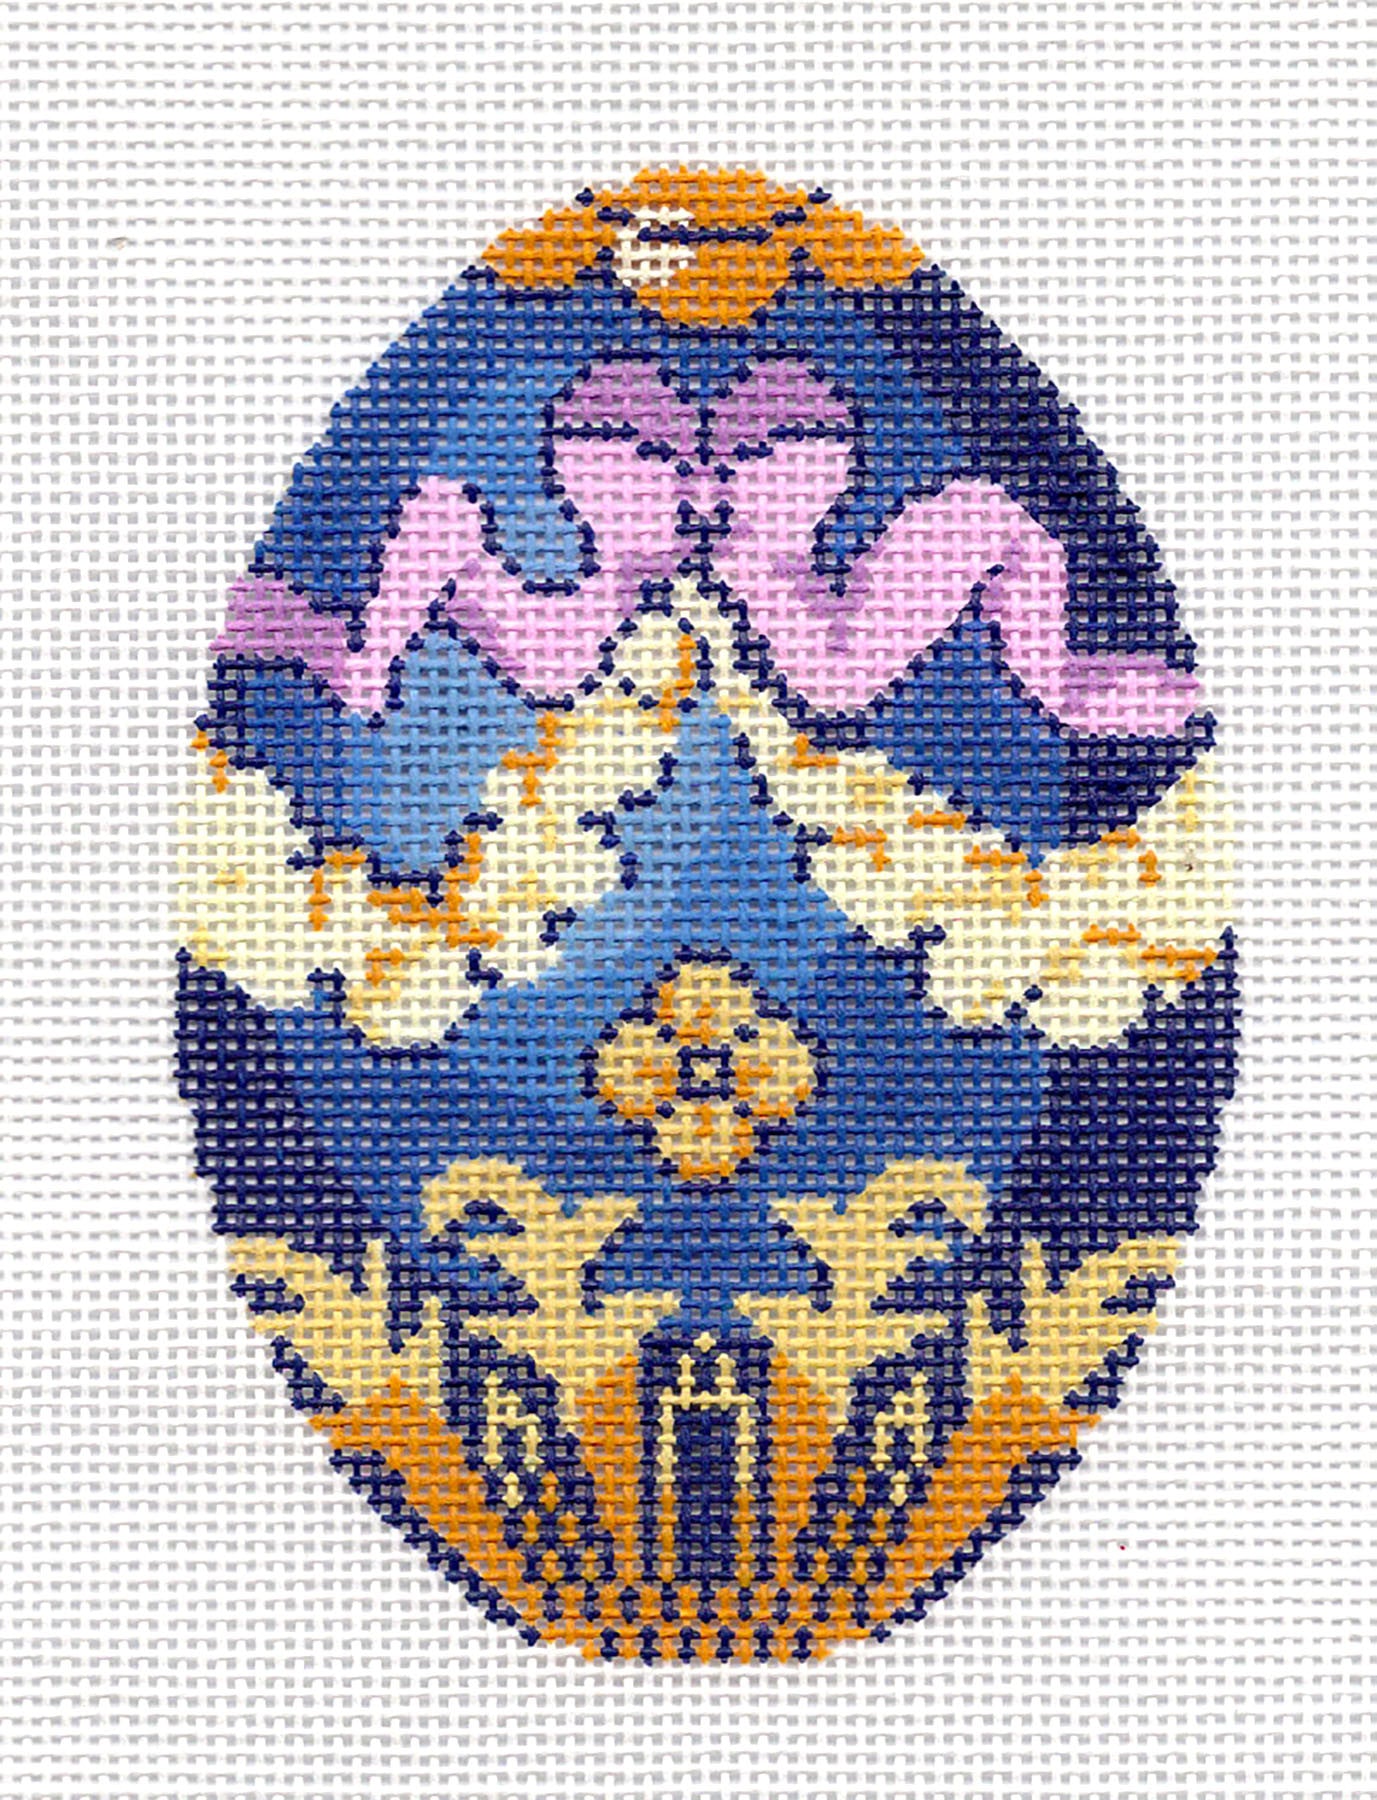 Faberge LEE Jeweled EGG with Pink Ribbon and Gold on Navy handpainted Needlepoint Canvas